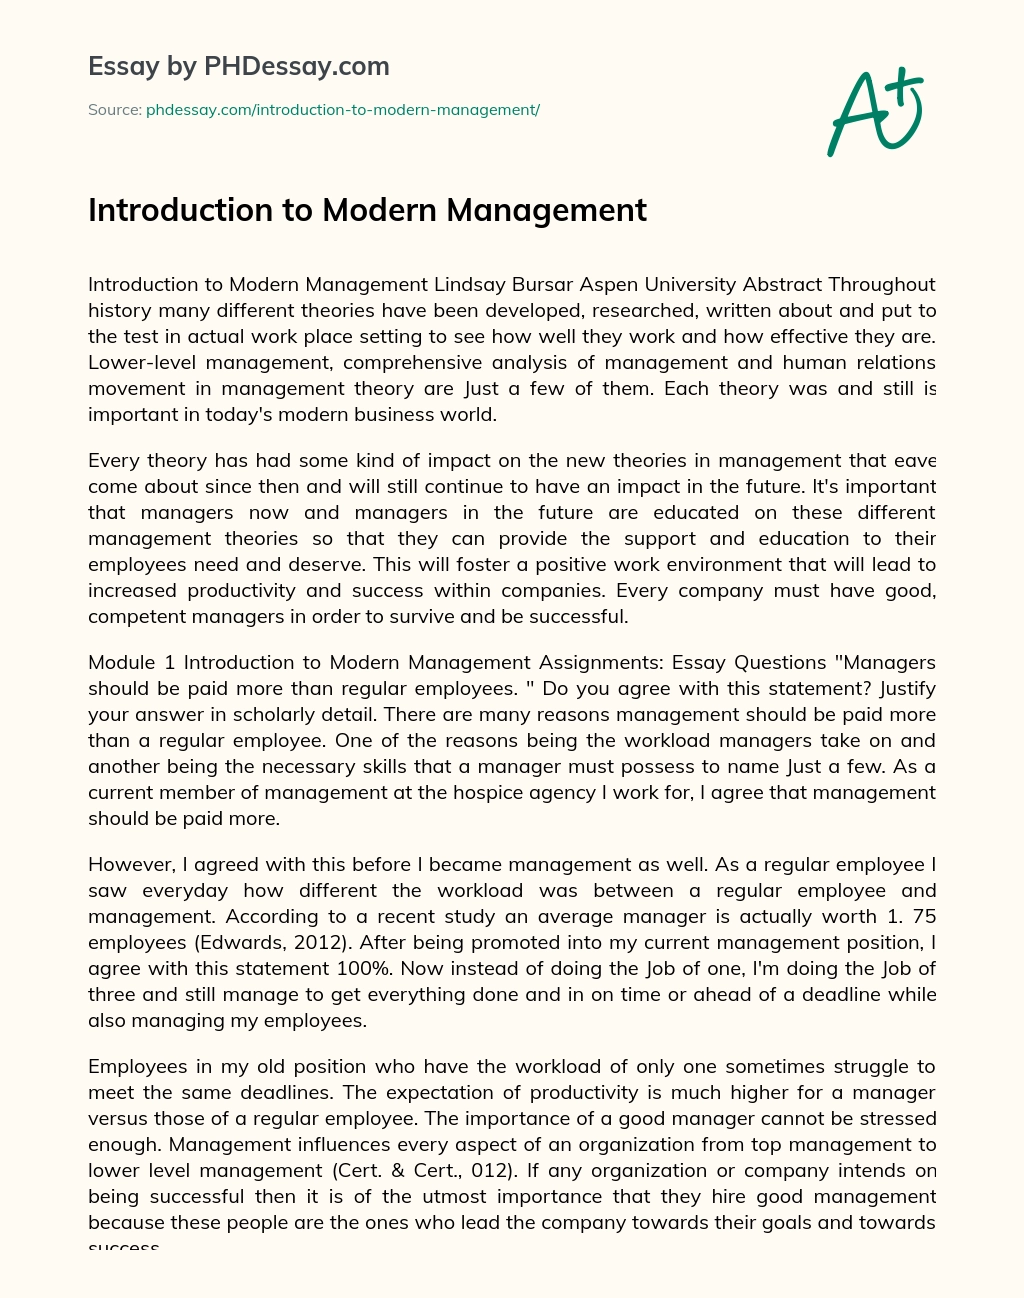 Introduction to Modern Management essay